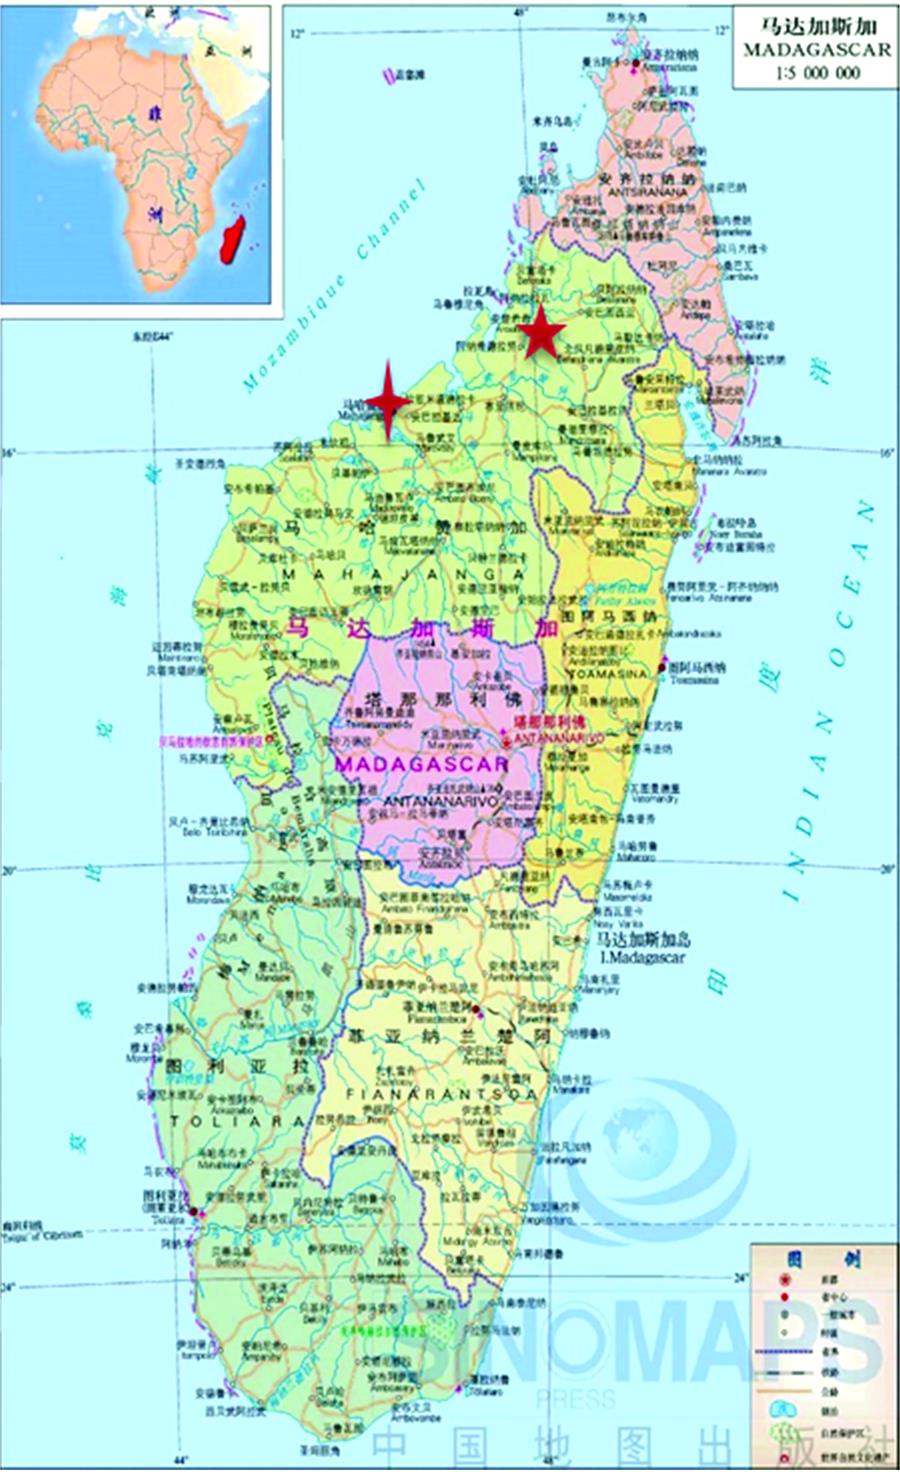 A map of MadagascarMahajanga and Antsohihy are labelled by quadrangular star and pentagram respectively